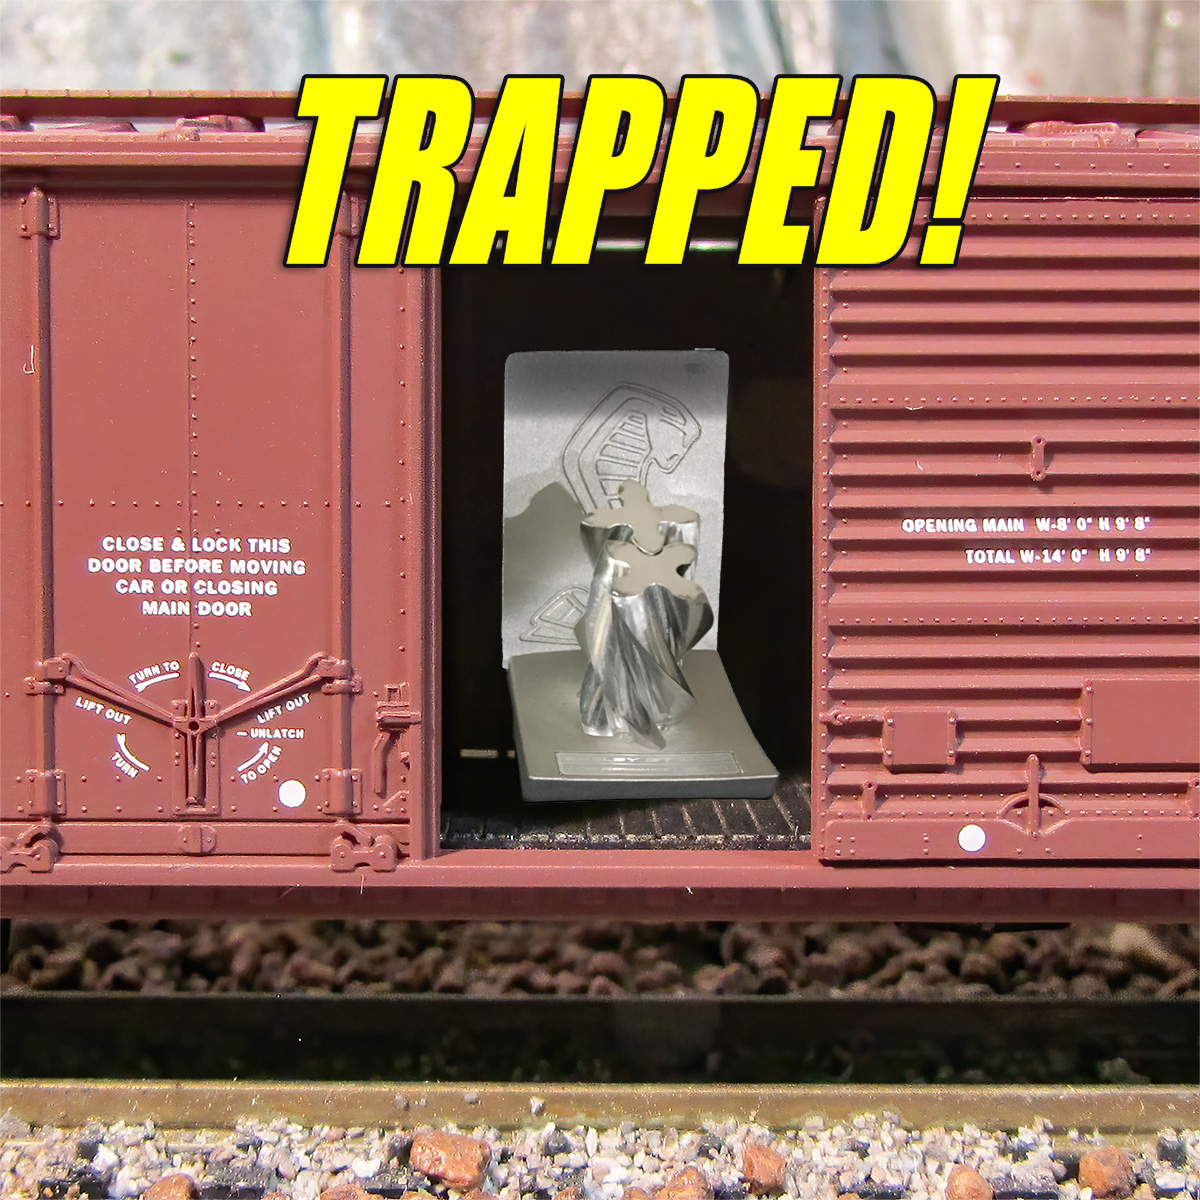 trapped-gift.jpg